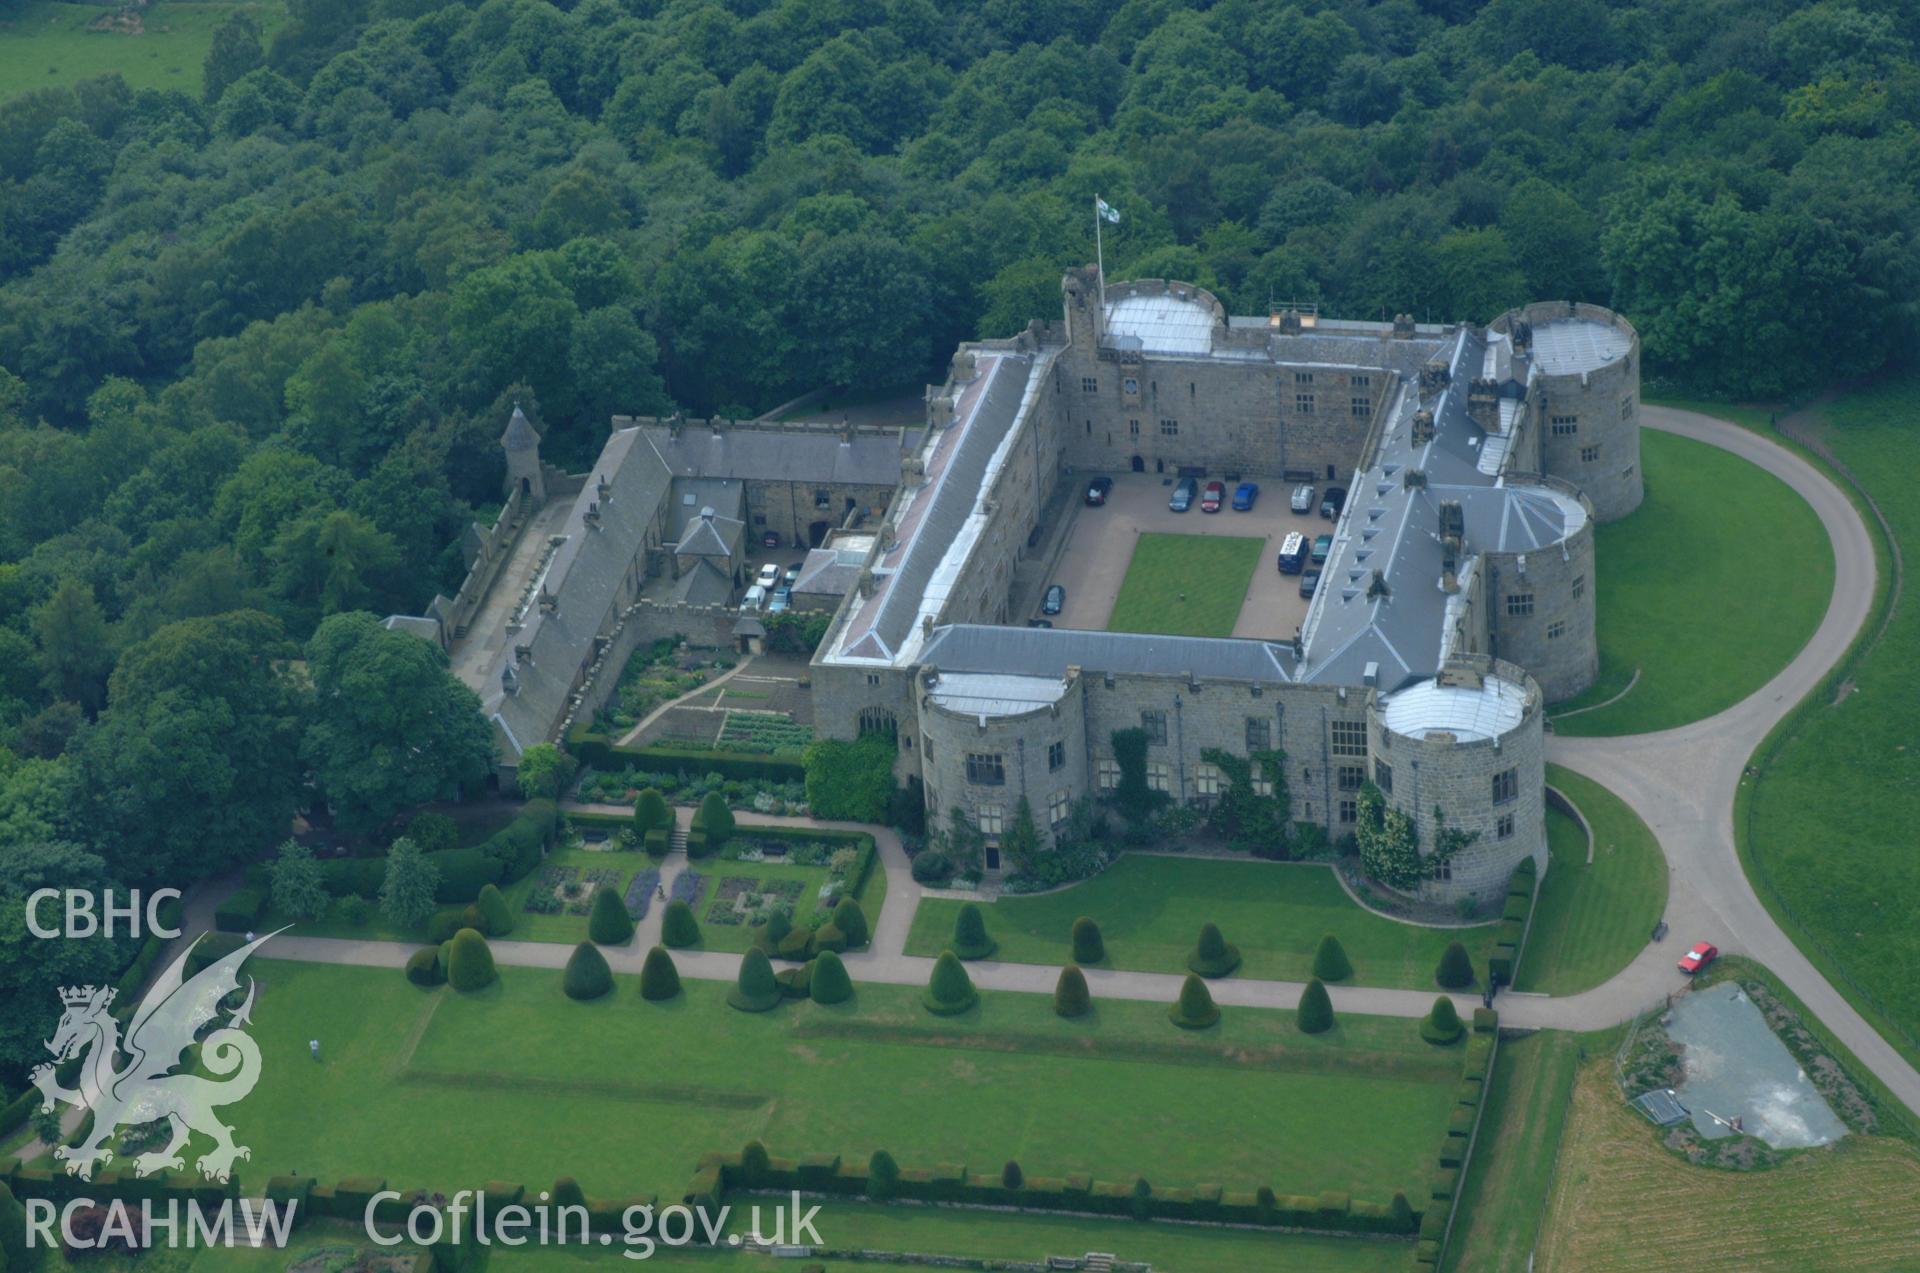 RCAHMW colour oblique aerial photograph of Chirk Castle taken on 08/06/2004 by Toby Driver